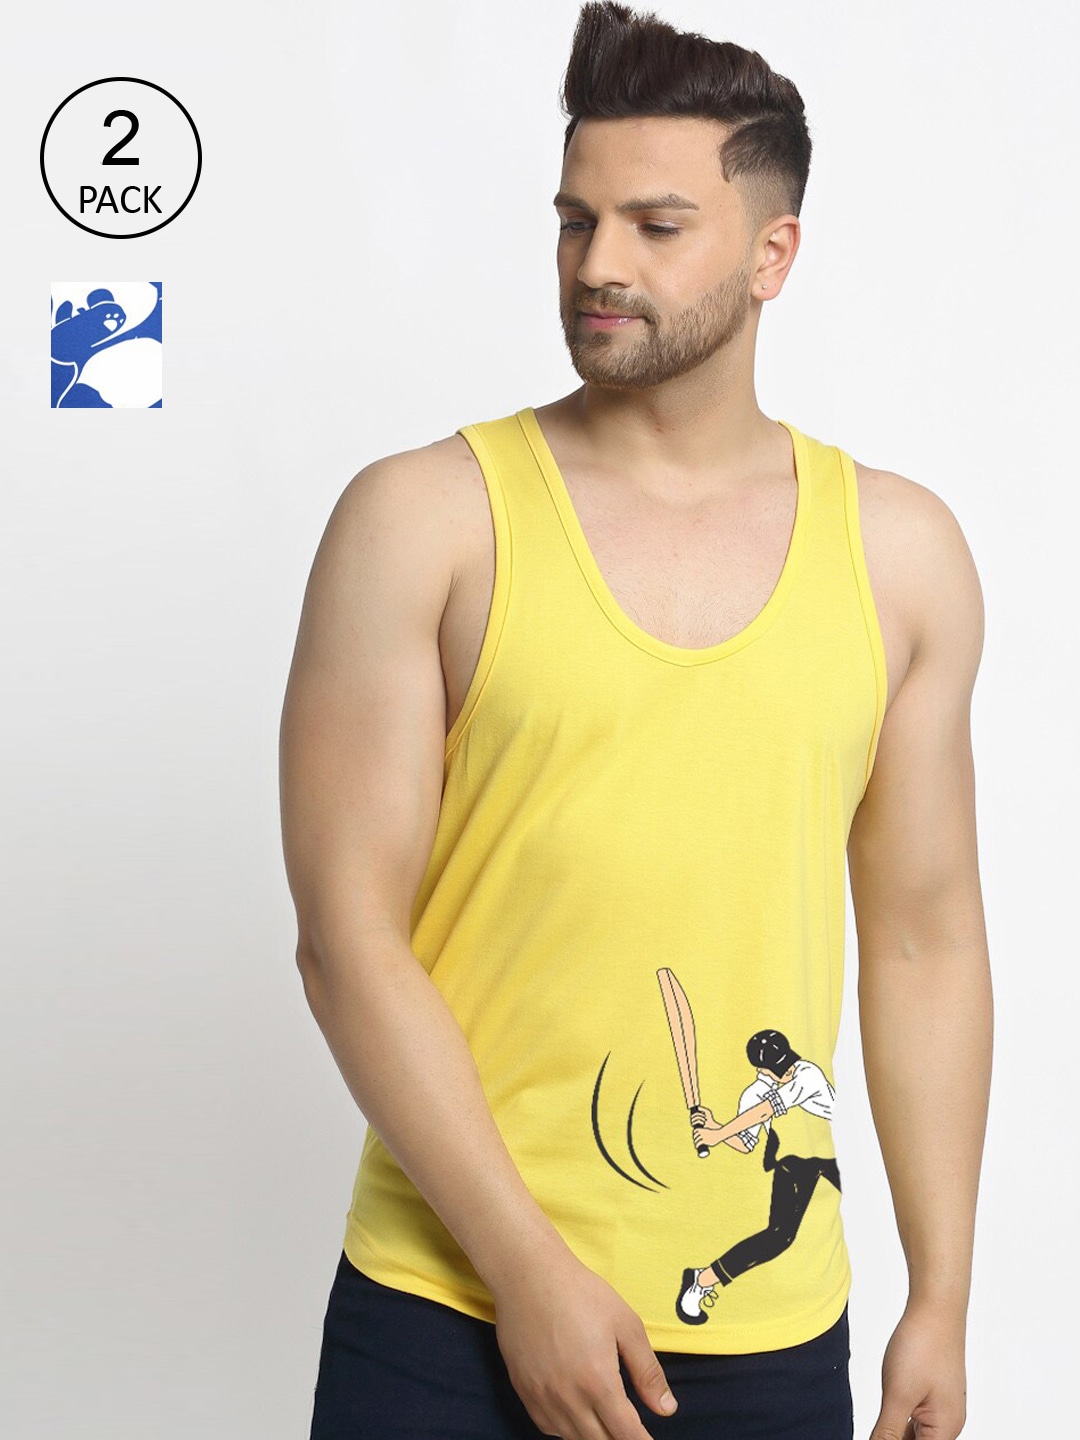 Clothing Innerwear Vests | Friskers Men Pack Of 2 Printed Pure Cotton Gym Vests - JH32415